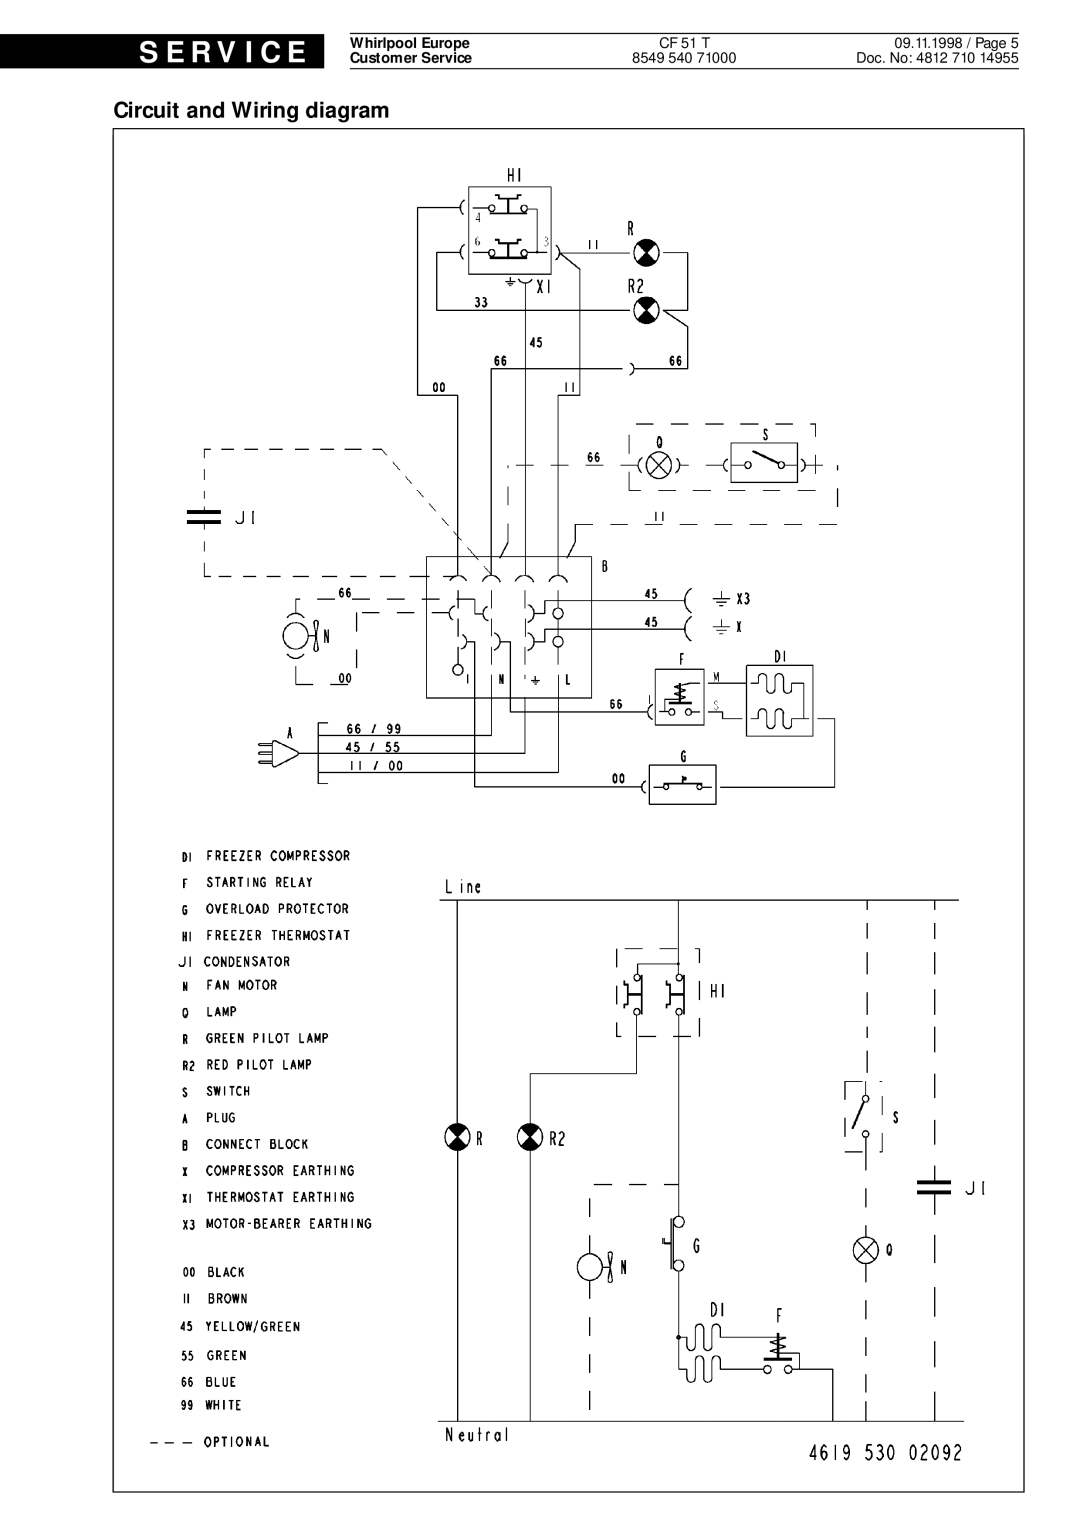 Whirlpool CF 51 T Circuit and Wiring diagram, S E R V I C E, Whirlpool Europe, Customer Service, 09.11.1998 / Page 